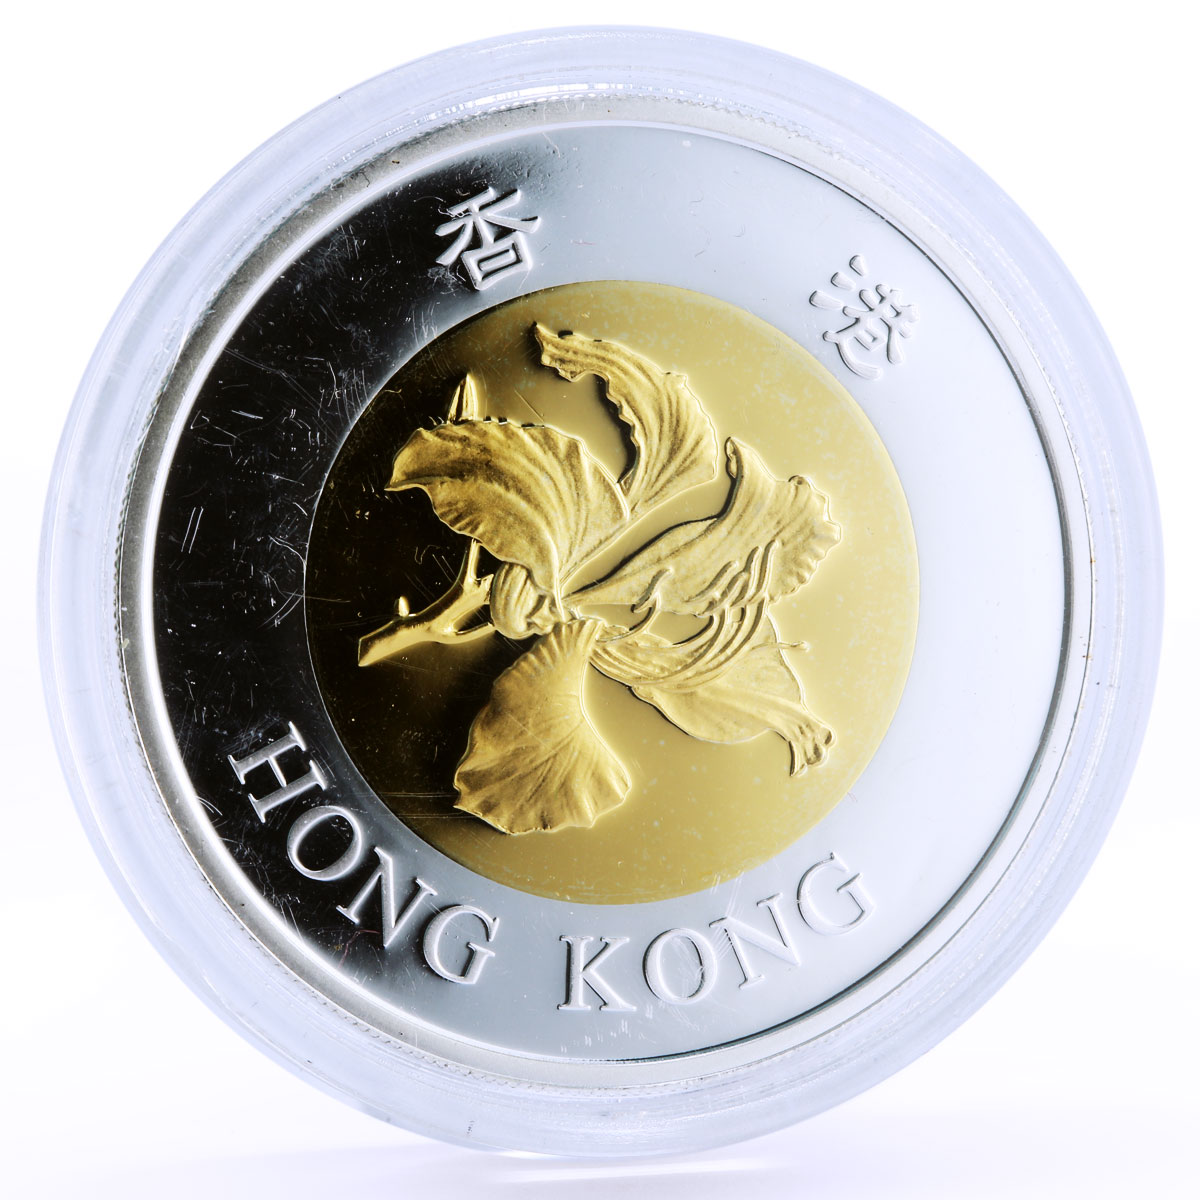 Hong Kong 50 dollars Good Luck Golden Fish Three Wishes gilded silver coin 2002